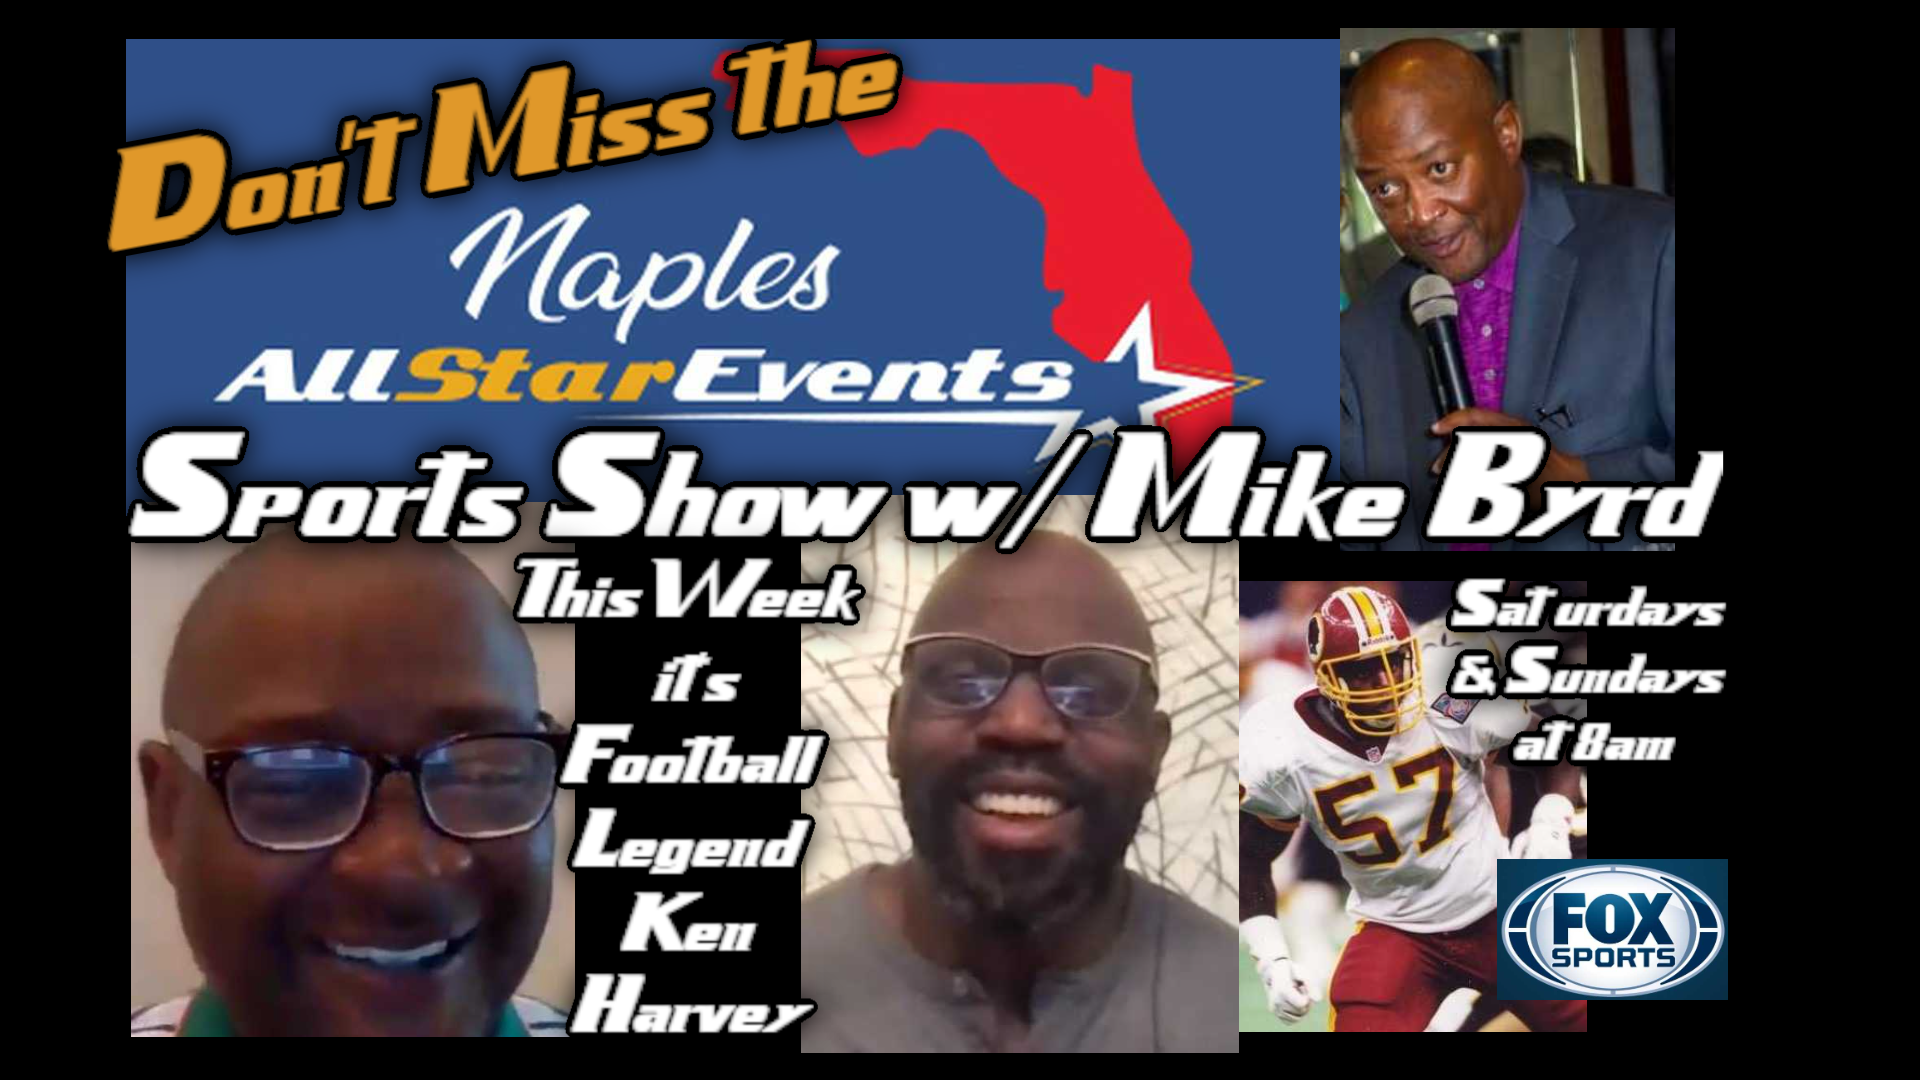 Naples All Star Events Sports Show 12-10-22 featuring Ken Harvey